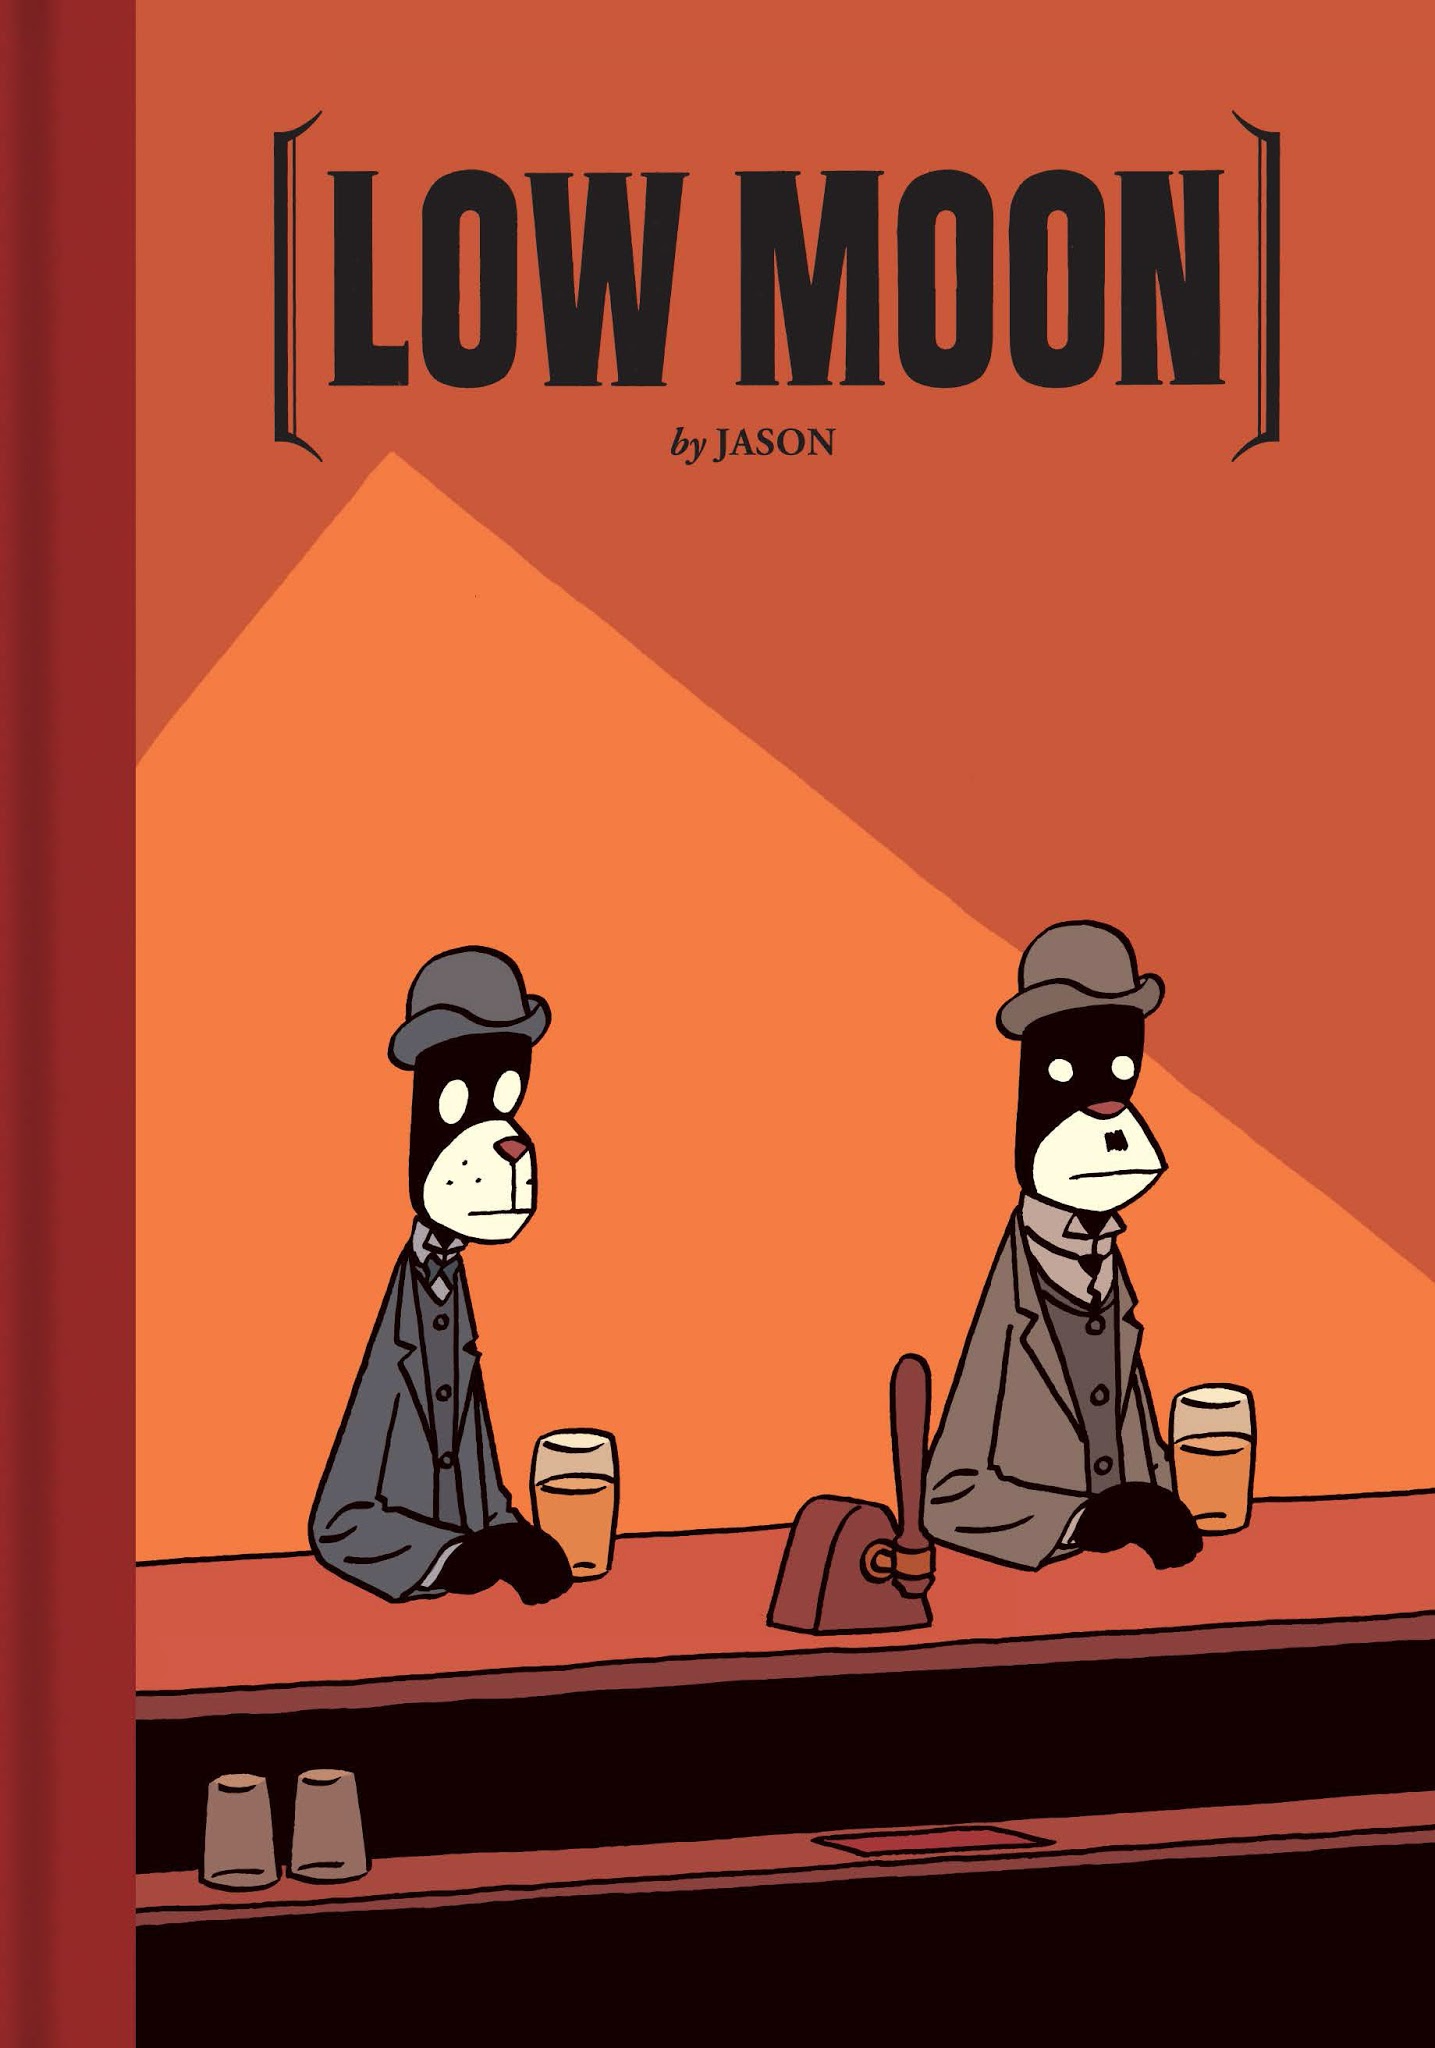 Read online Low Moon comic -  Issue # TPB - 1